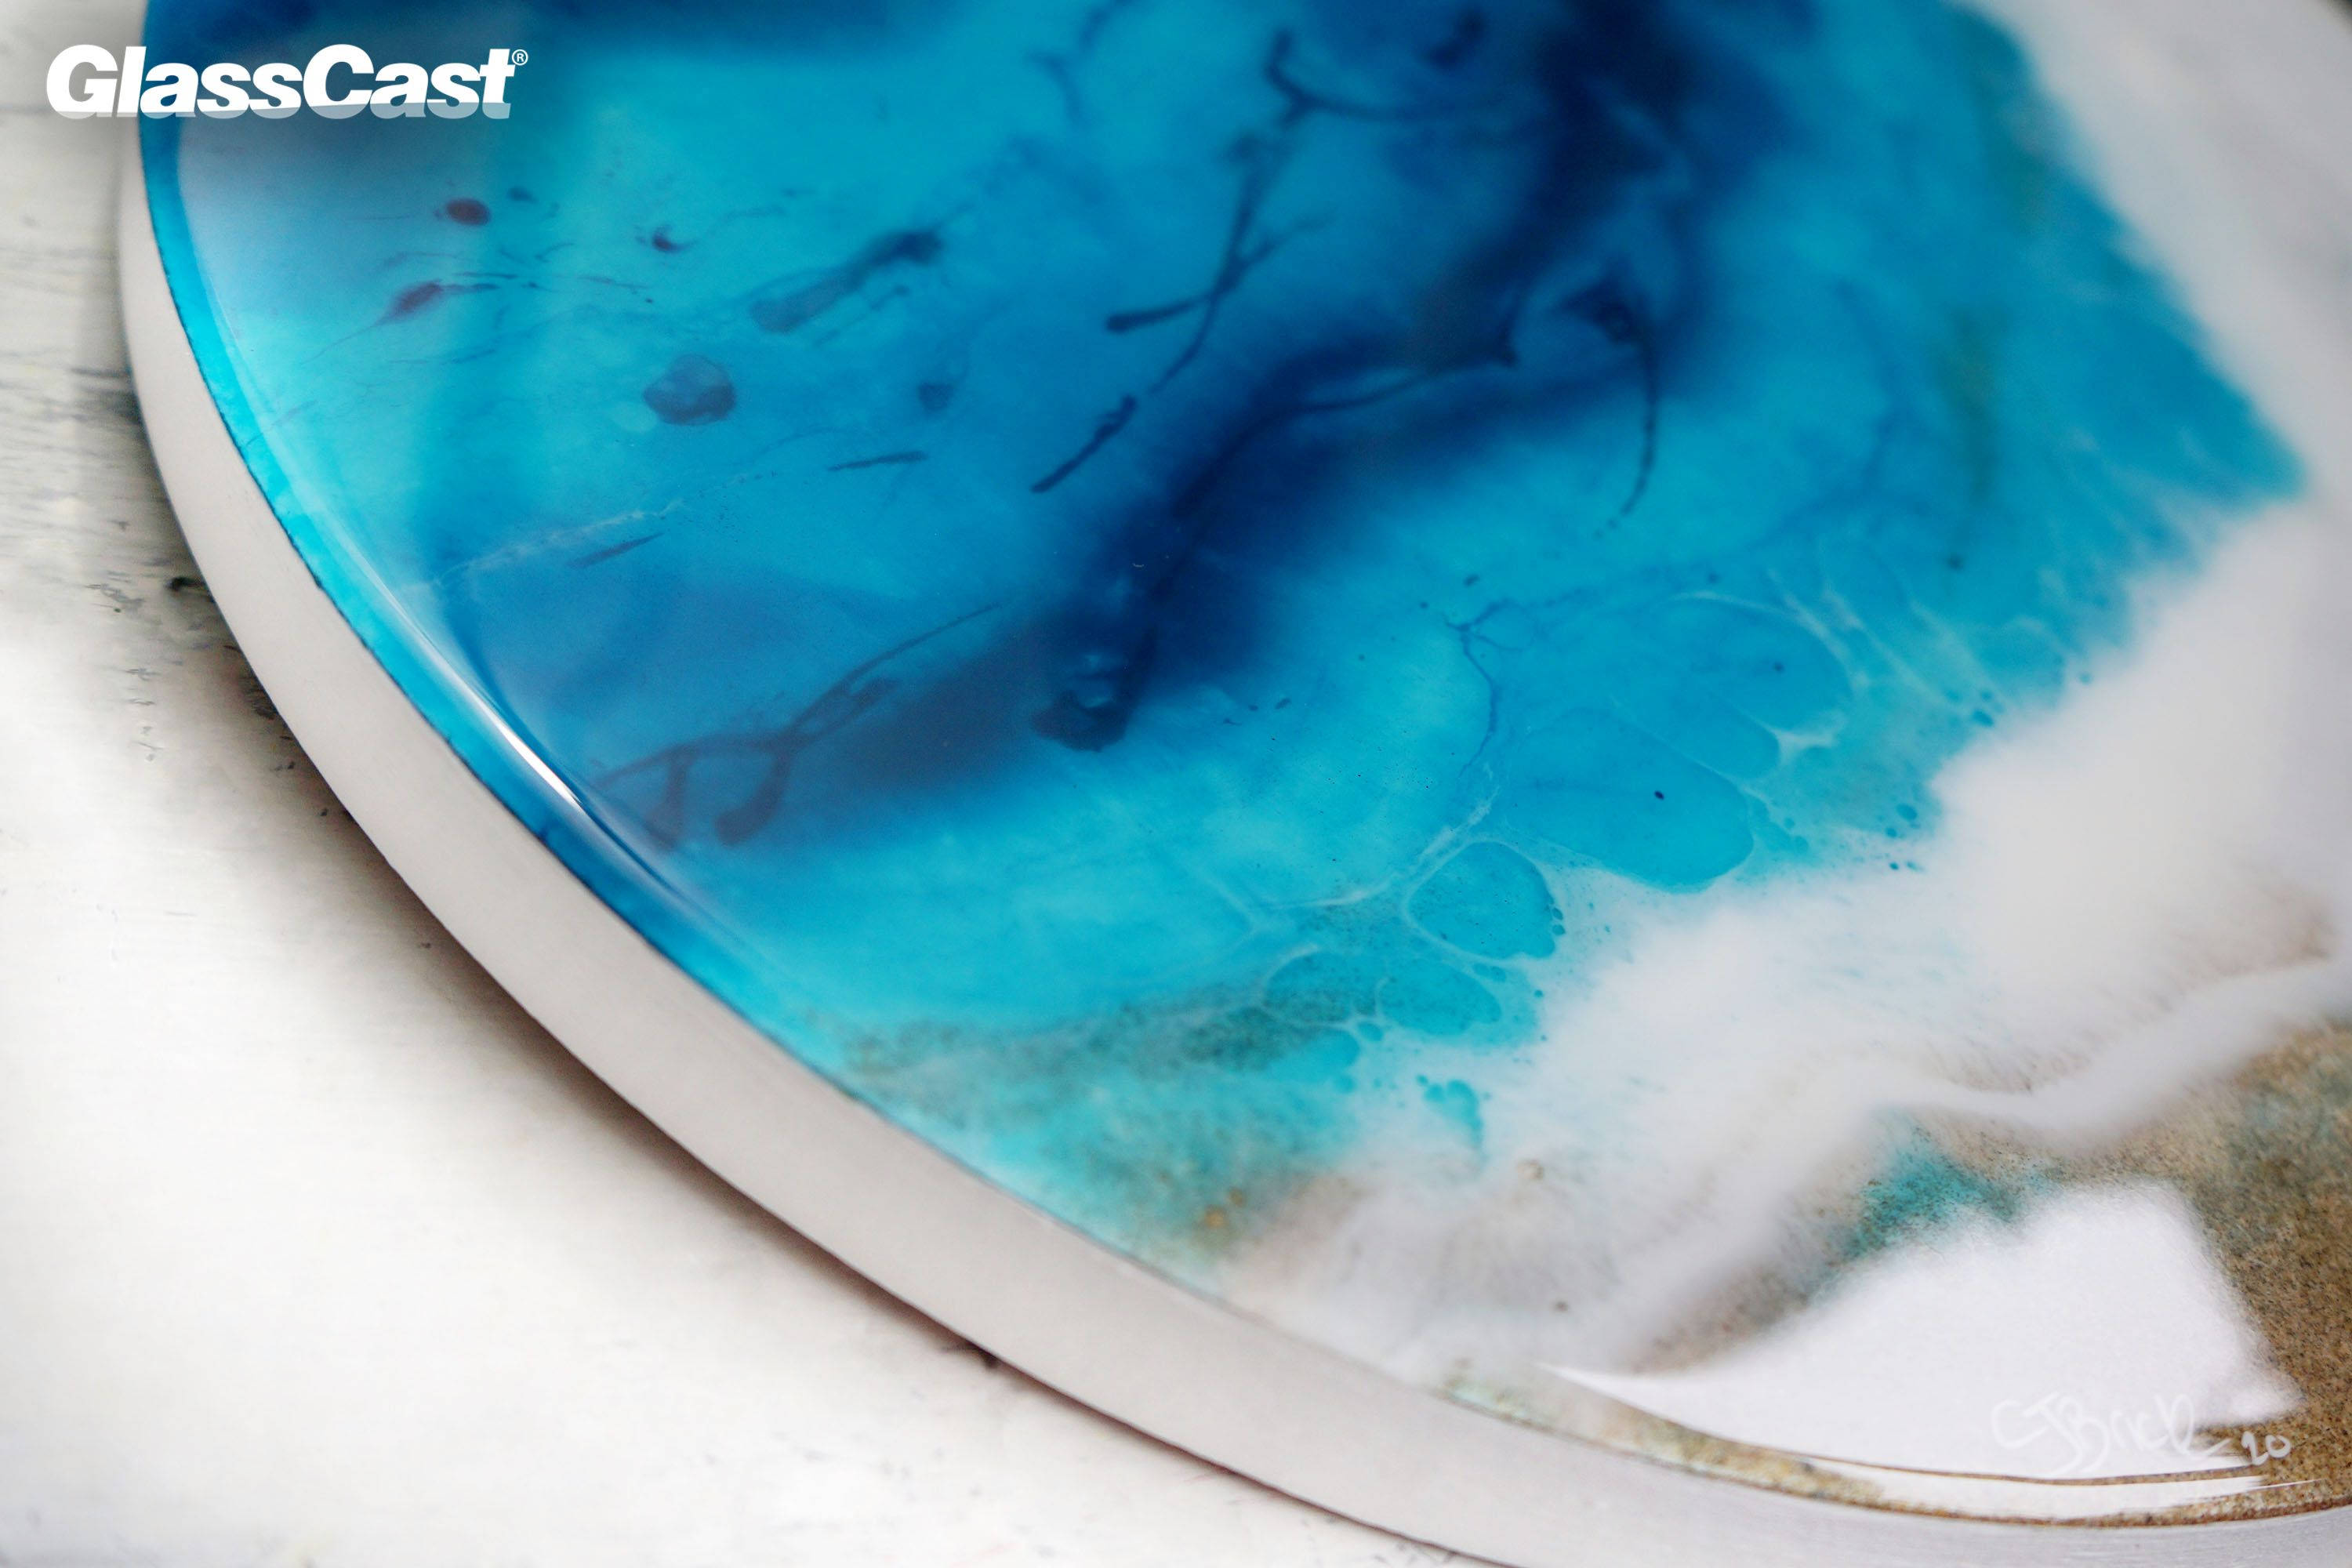 CULR Universal Pigments for Epoxy Resin Art, Countertops and Floors -  GlassCast